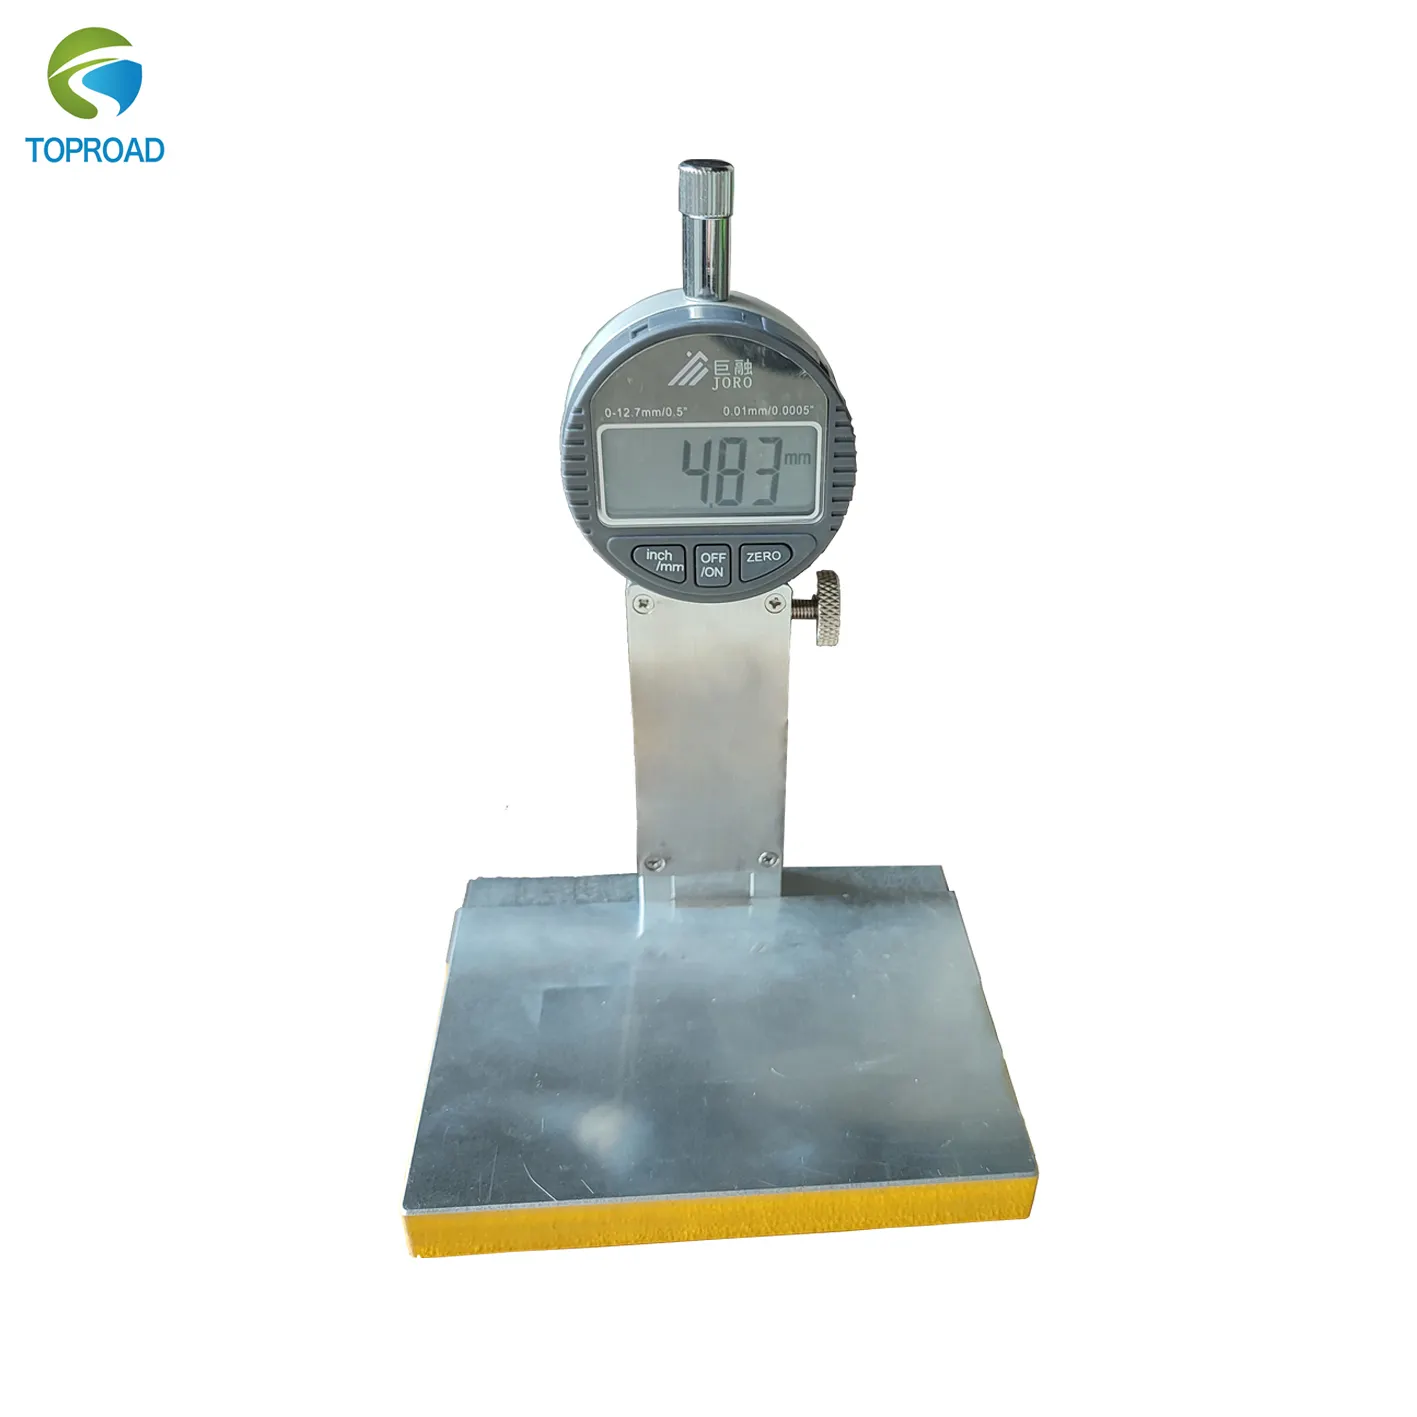 Portable electronic Pavement Markings Thickness Measurement Checking Gauge Digital Road Marking For Field And Lab Marking Test